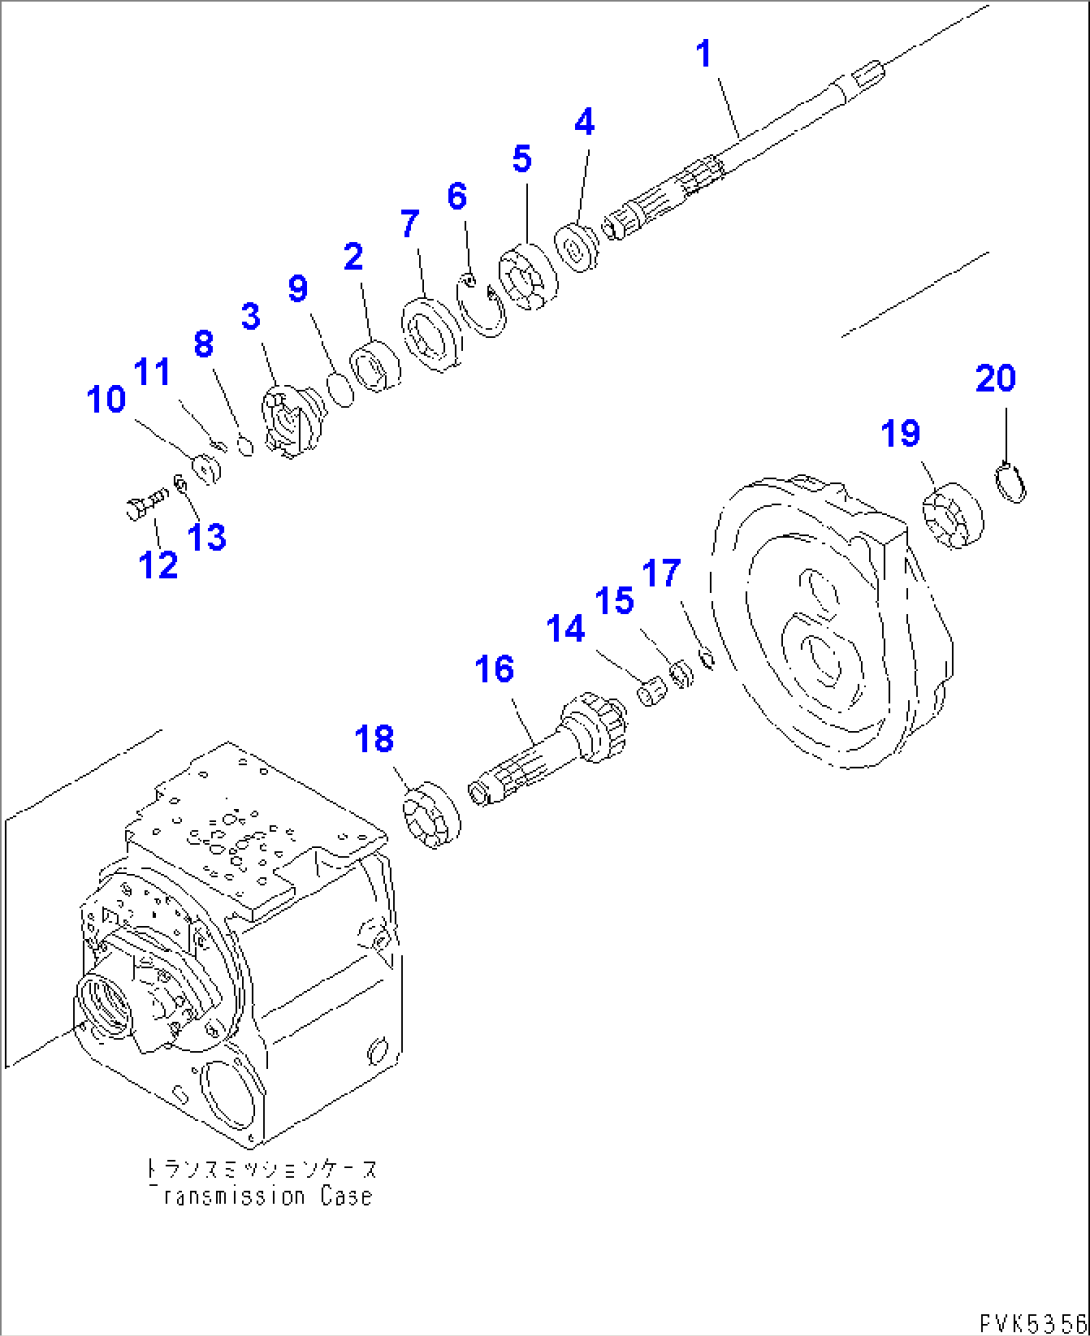 TRANSMISSION (FOR F3-R3 TRANSMISSION) (INPUT AND OUTPUT)